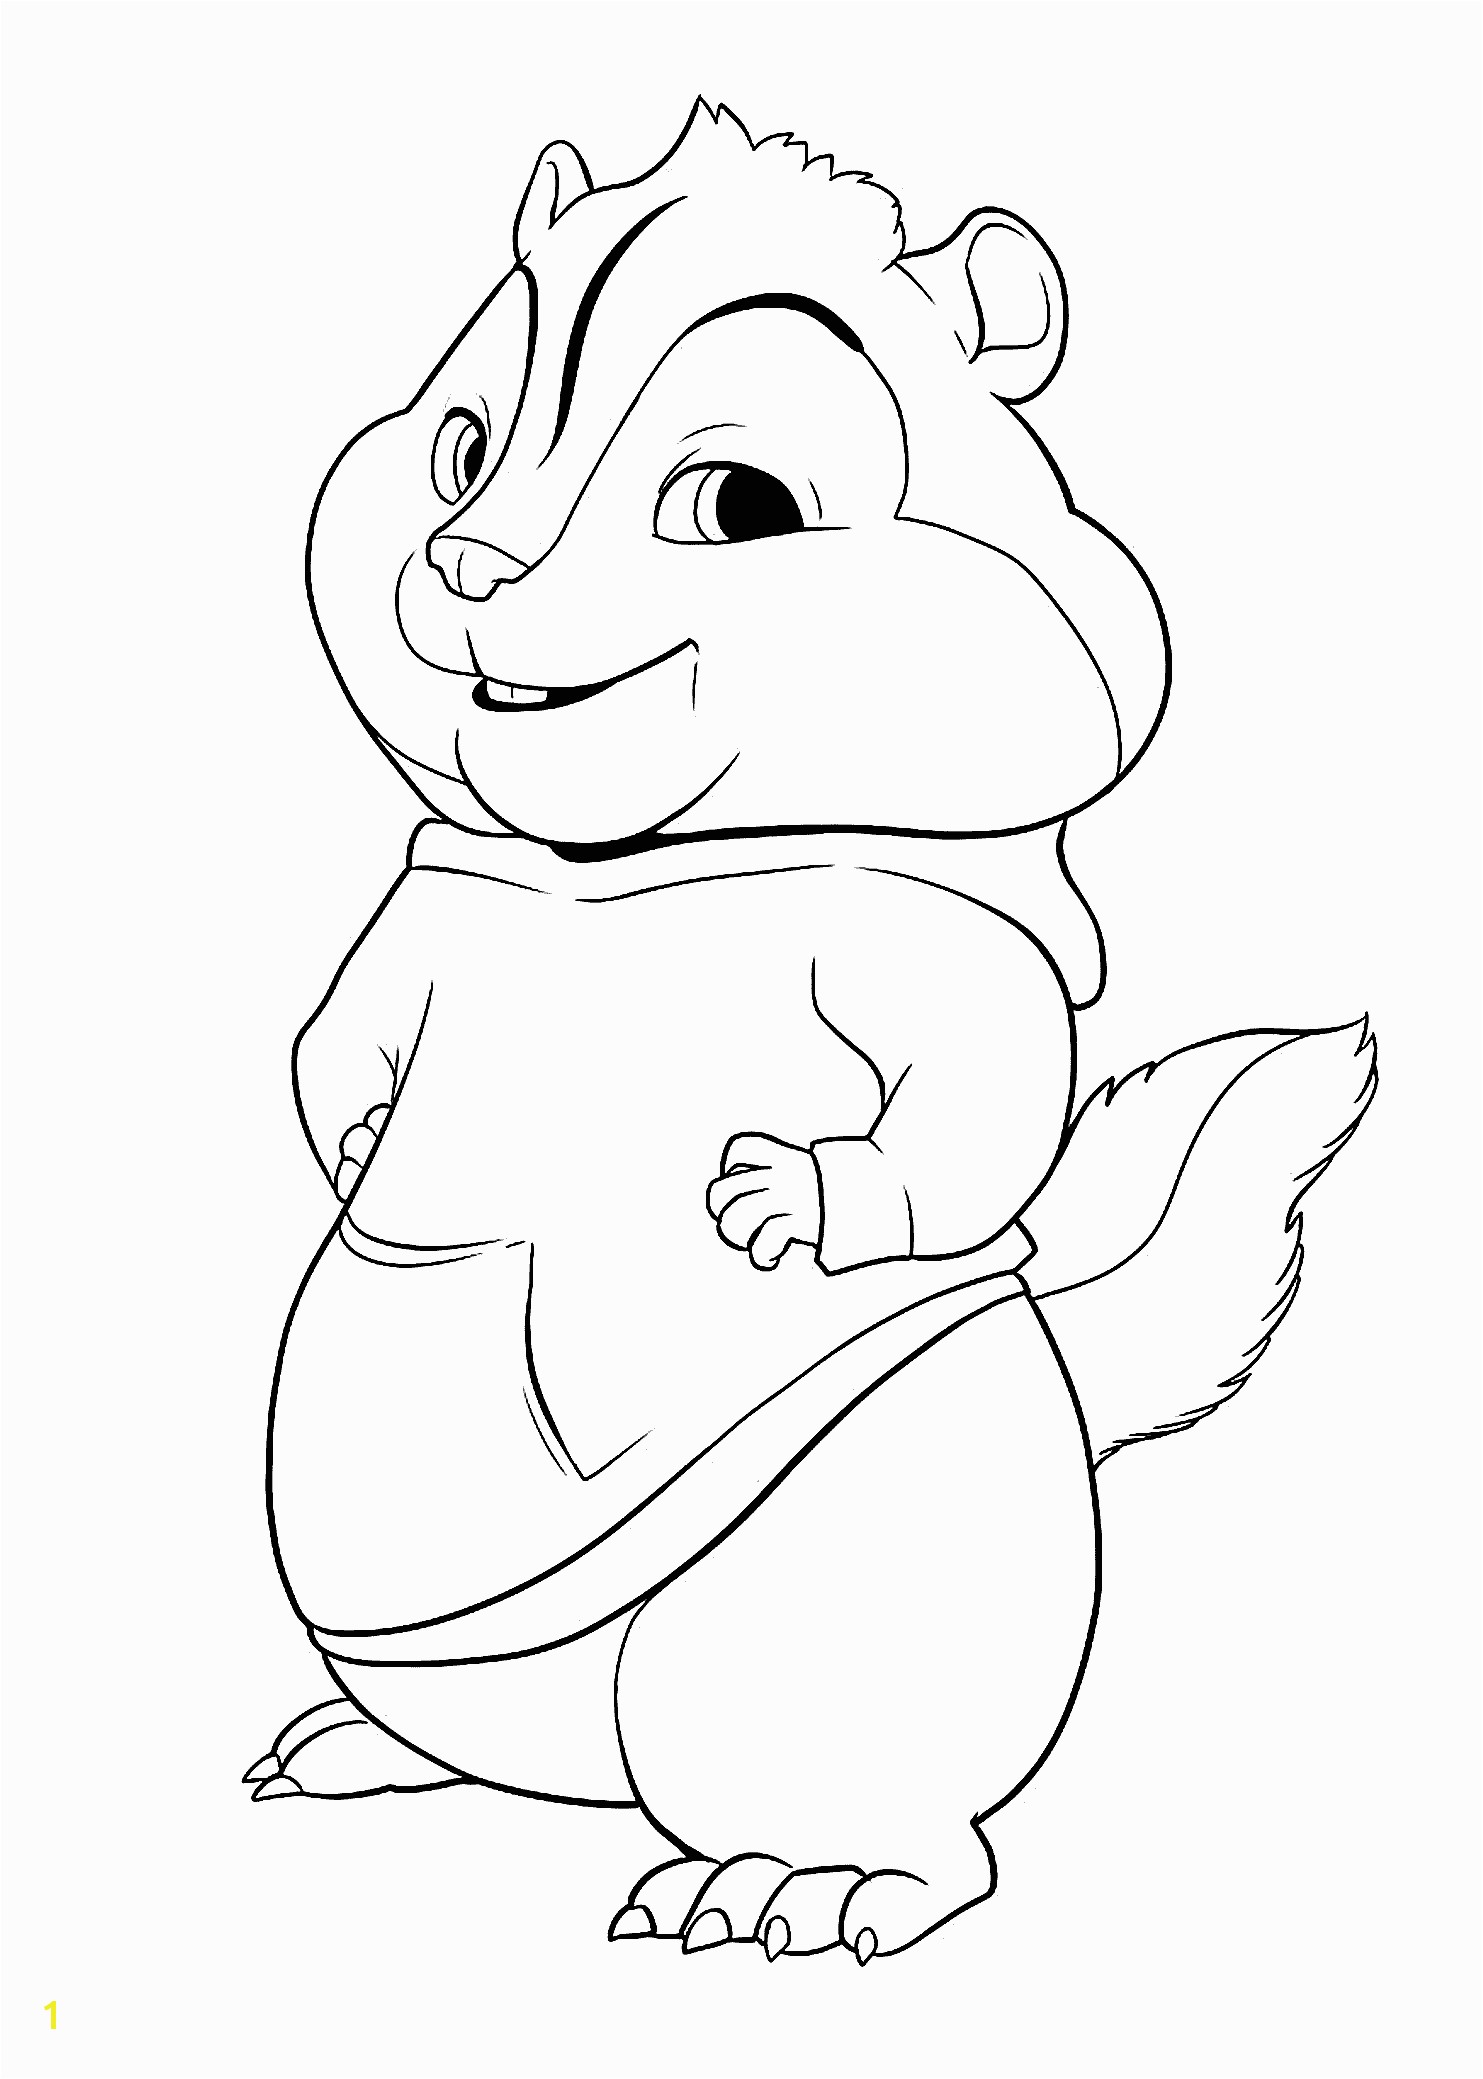 Chipettes Coloring Pages to Print theodore From Alvin and the Chipmunks Coloring Pages for Kids